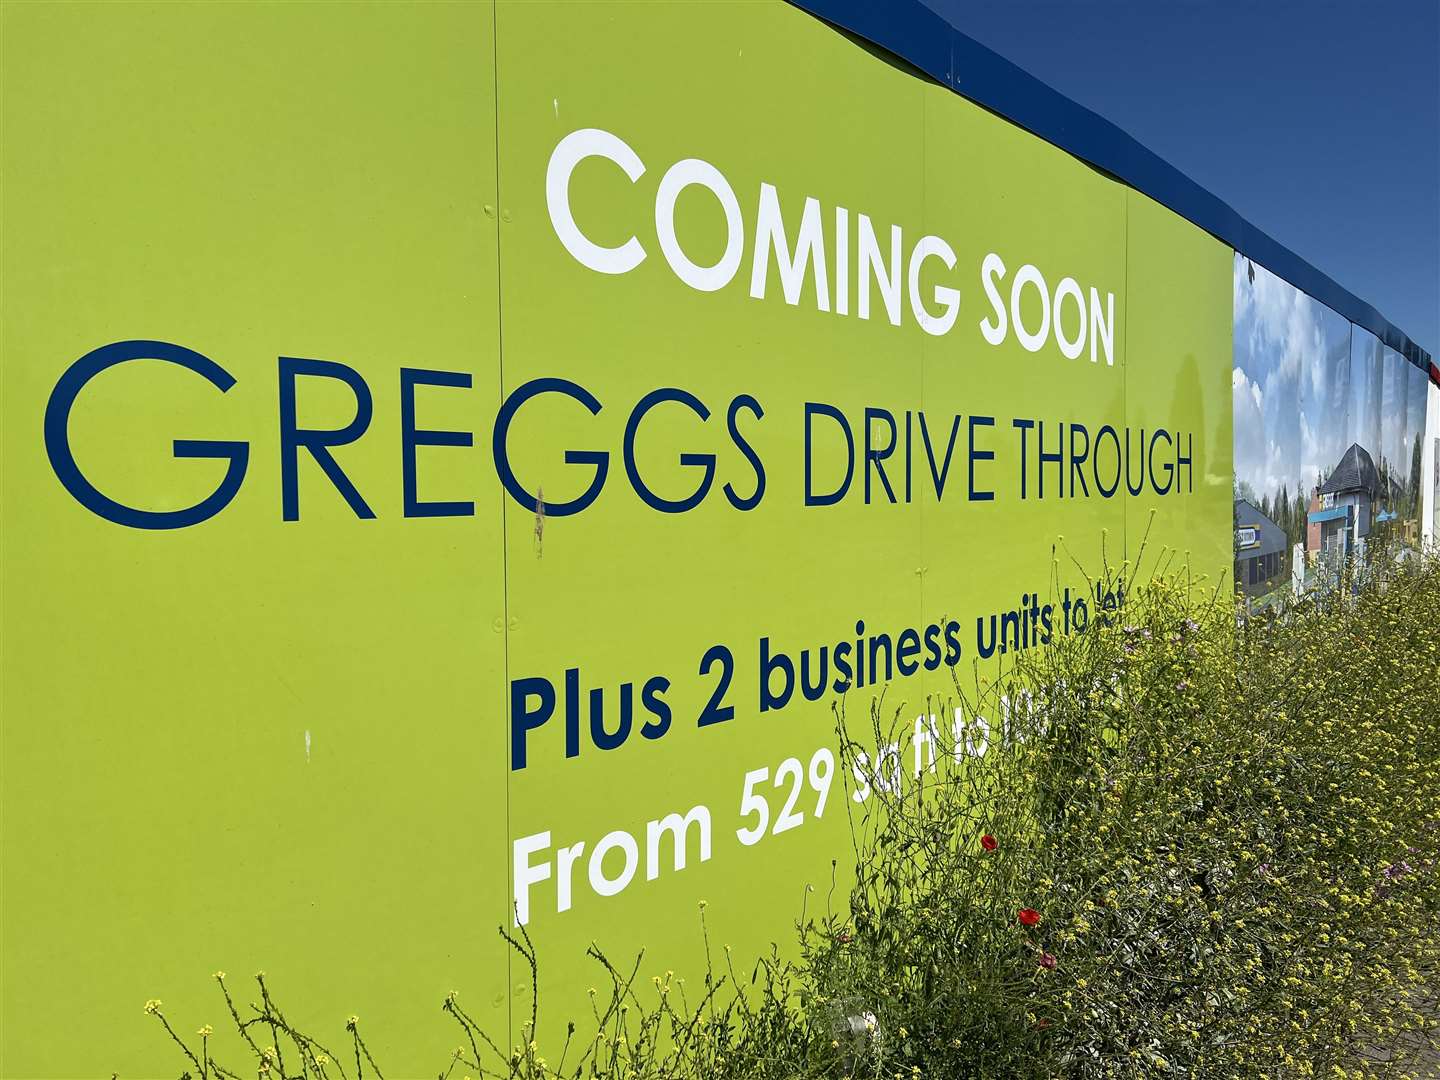 Greggs first Kent drive-thru will be opening in Sittingbourne